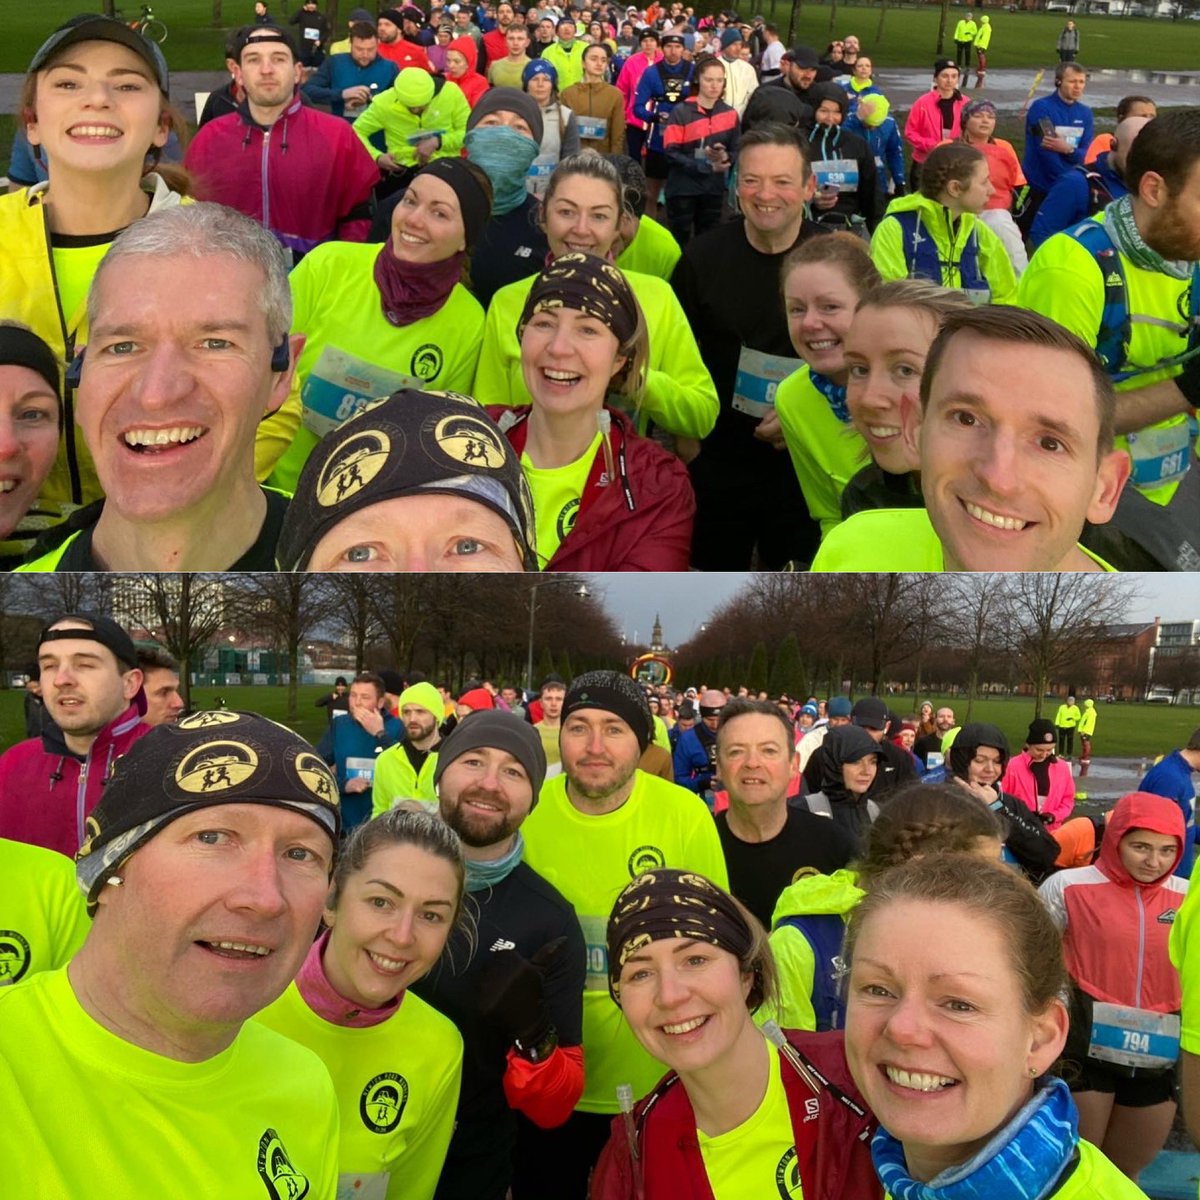 Today let’s look back at our NRR Team running the Glasgow Winter Warmer. What an amazing amount of PB’S won 🥇 that Sunday. But a big big mention to our runners from Team Hurley, what an awesome job you guys did 👏👏👏 #ThrowbackThursday #team #winners #Runningclubs